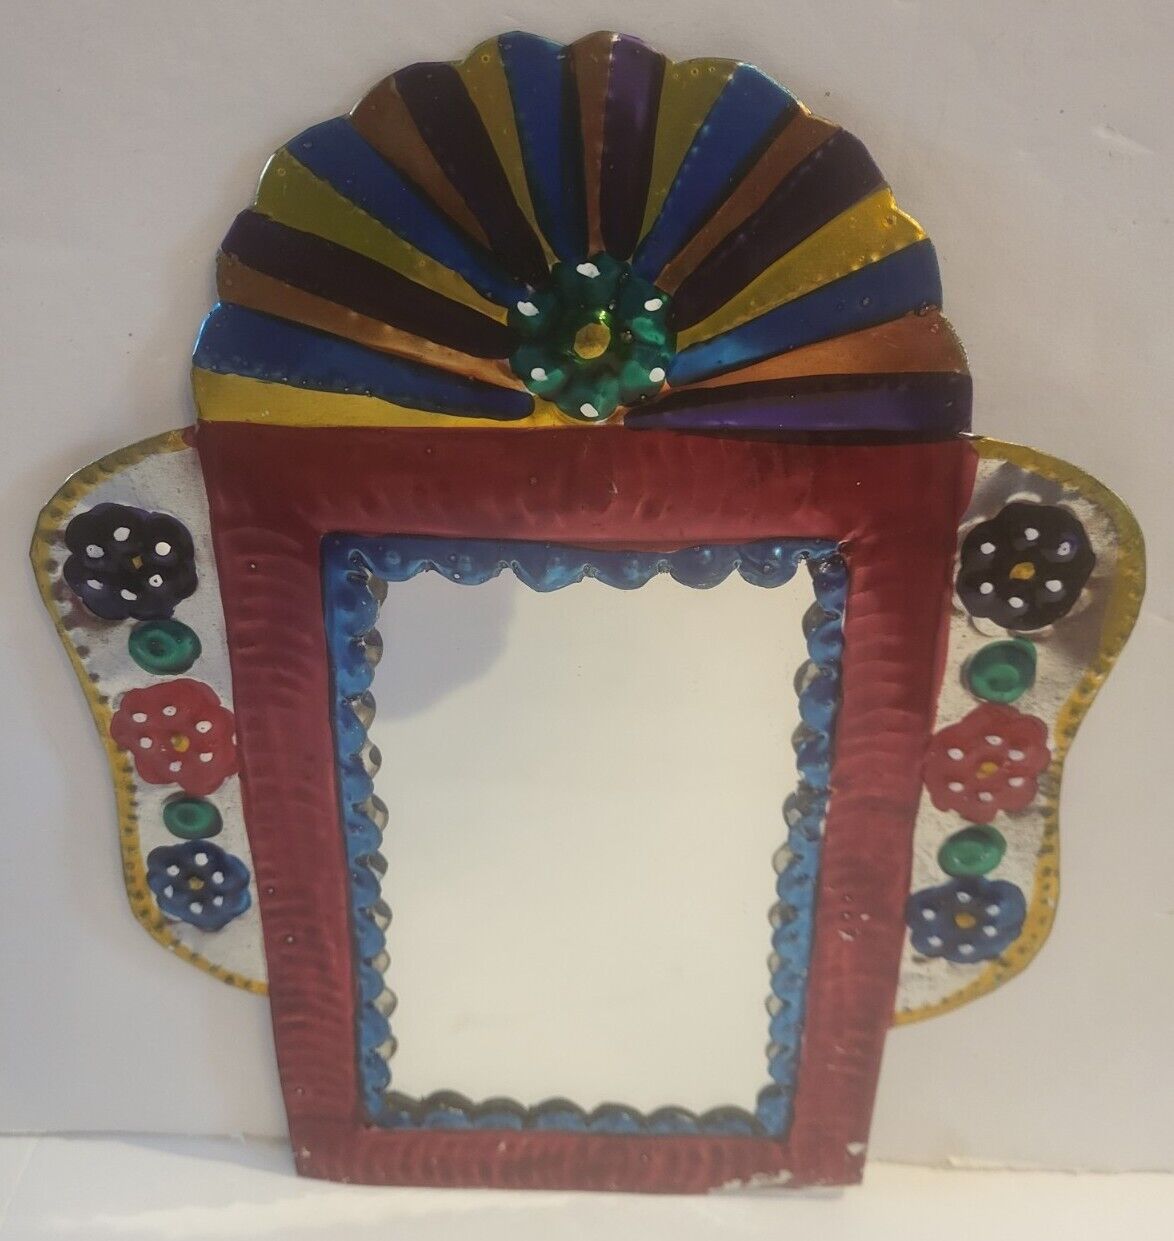 BEAUTIFUL VINTAGE MEXICO EMBOSSED TIN ART MIRROR PICTURE FRAME FANCY COLORFUL